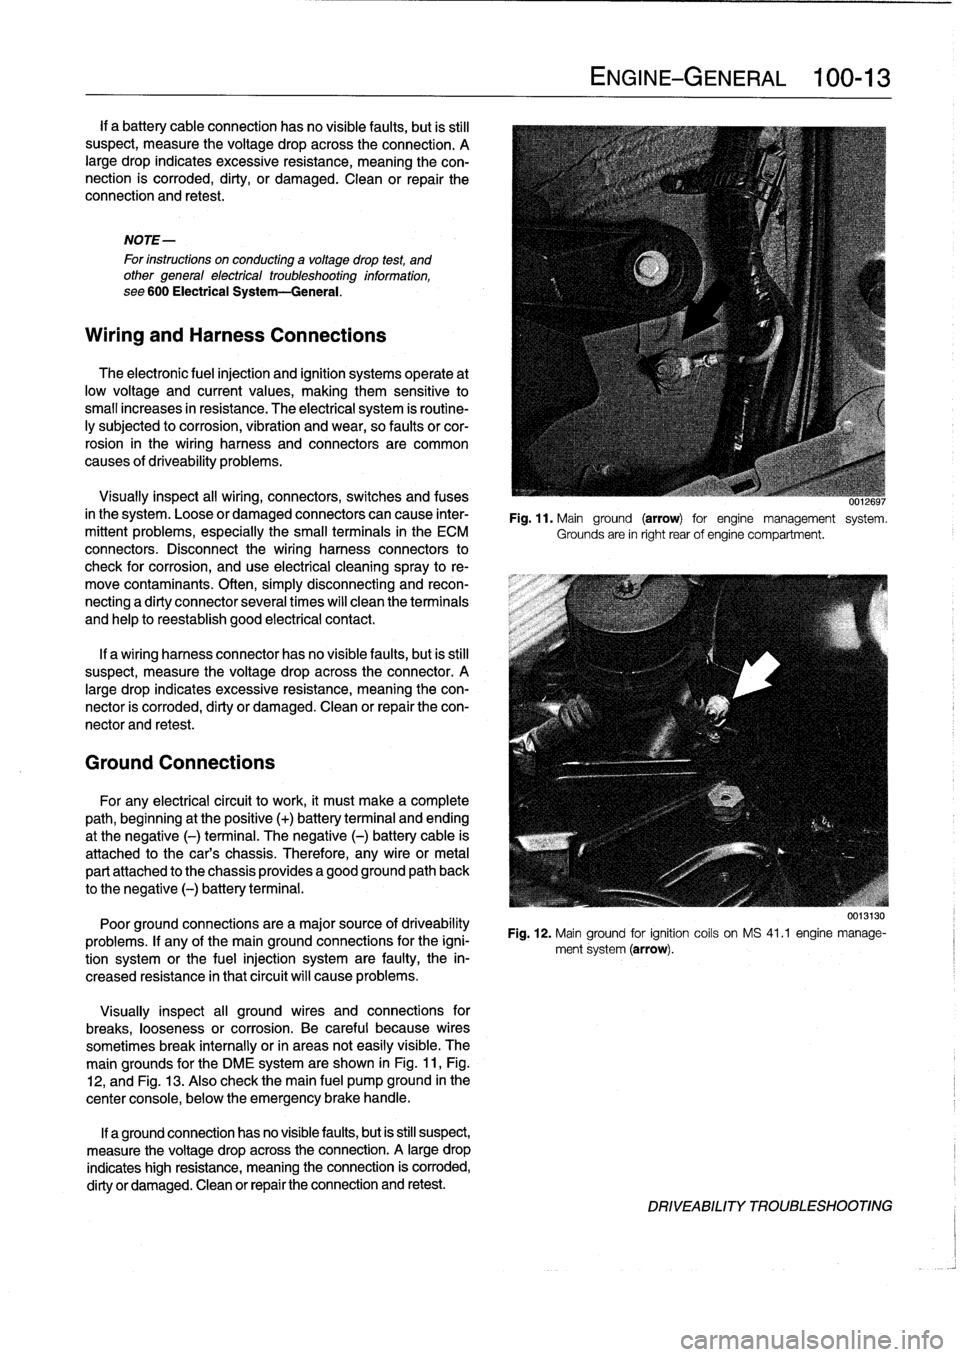 BMW 328i 1994 E36 Workshop Manual 
If
a
battery
cableconnection
hasno
visible
faults,
but
is
still
suspect,
measure
the
voltage
drop
across
the
connection
.
A
large
drop
indicates
excessive
resistance,
meaning
the
con-
nection
is
corr